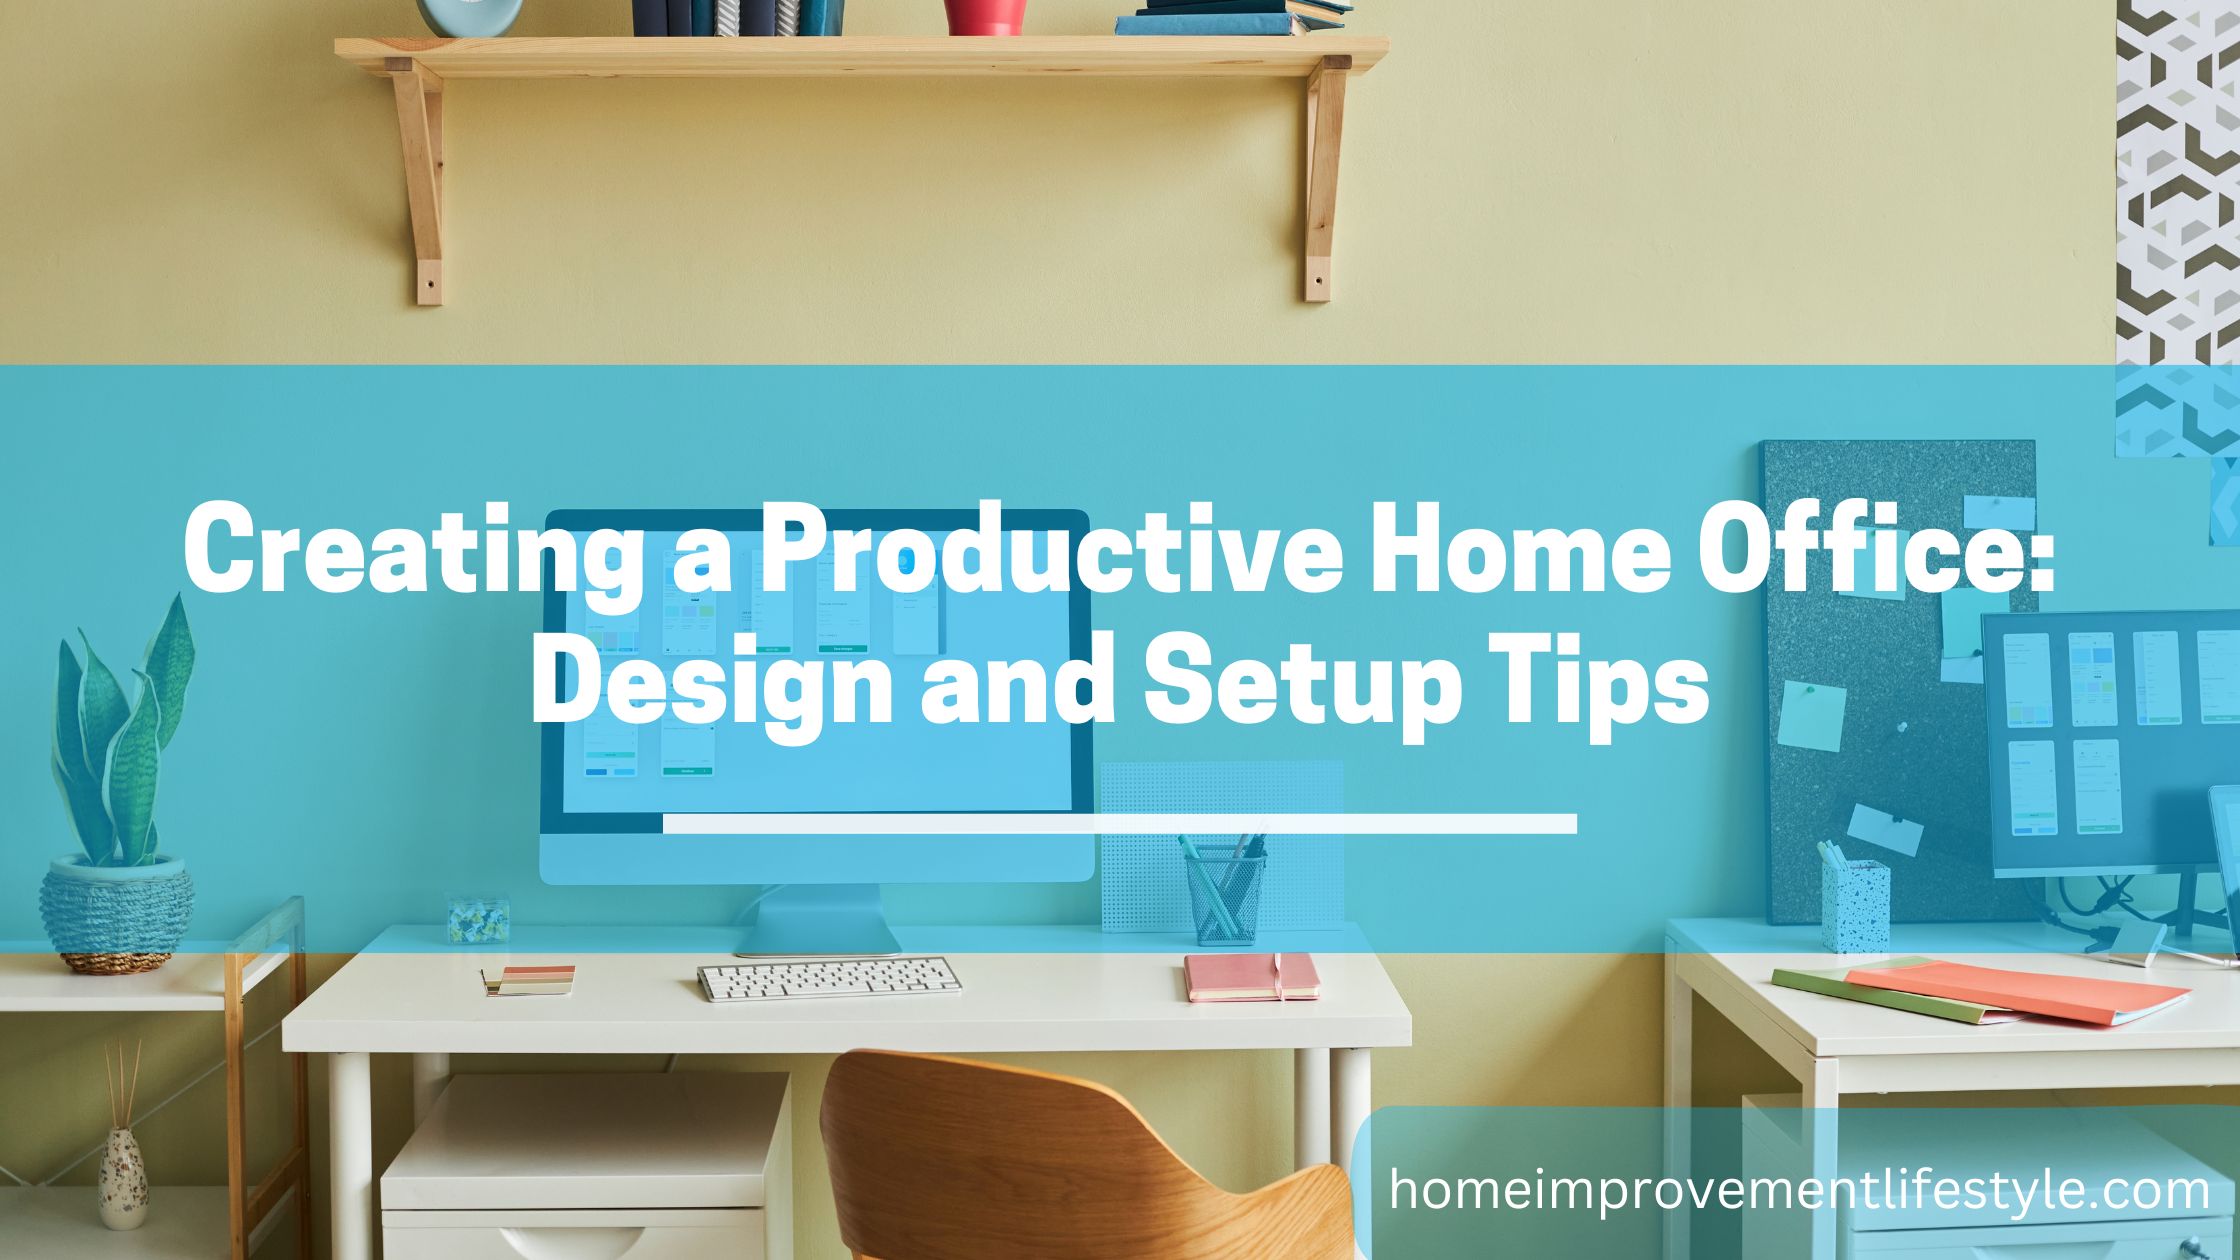 Creating a Productive Home Office: Design and Setup Tips